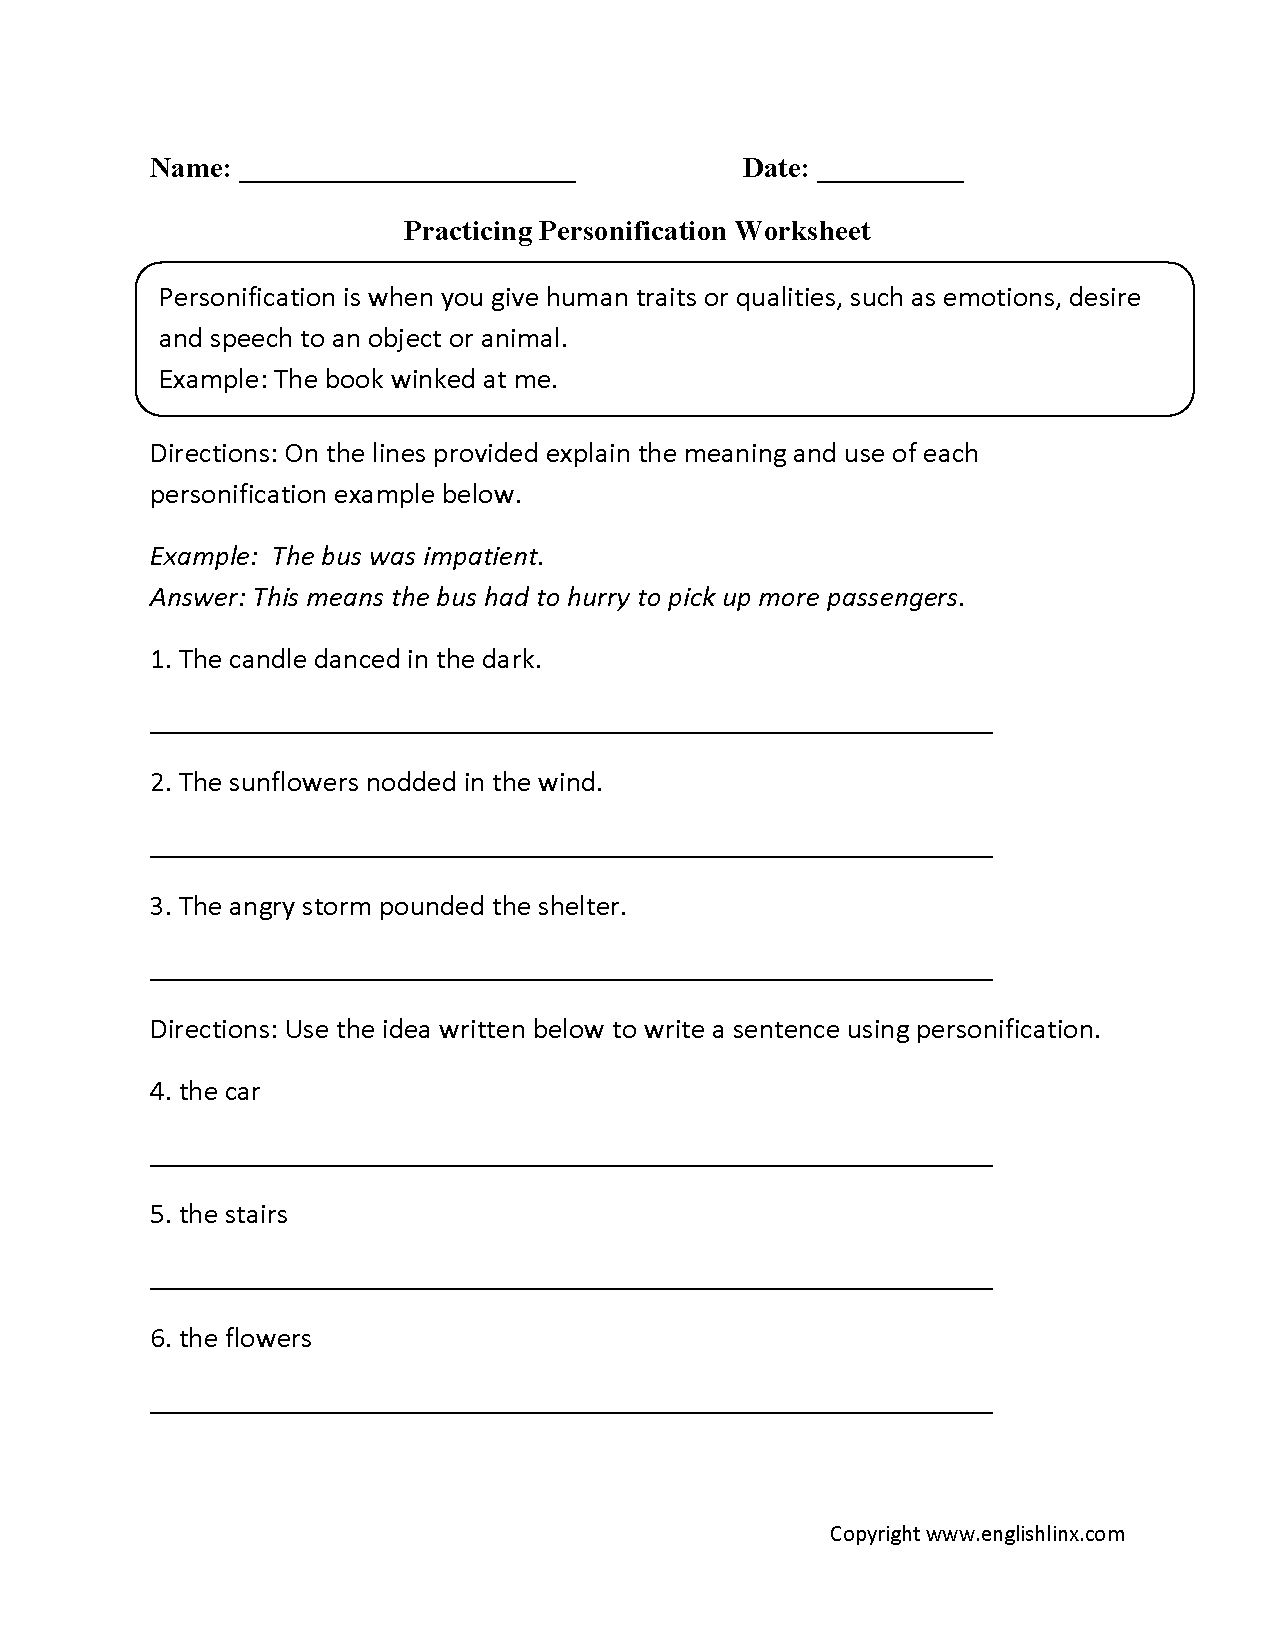 figurative-language-worksheets-personification-worksheets